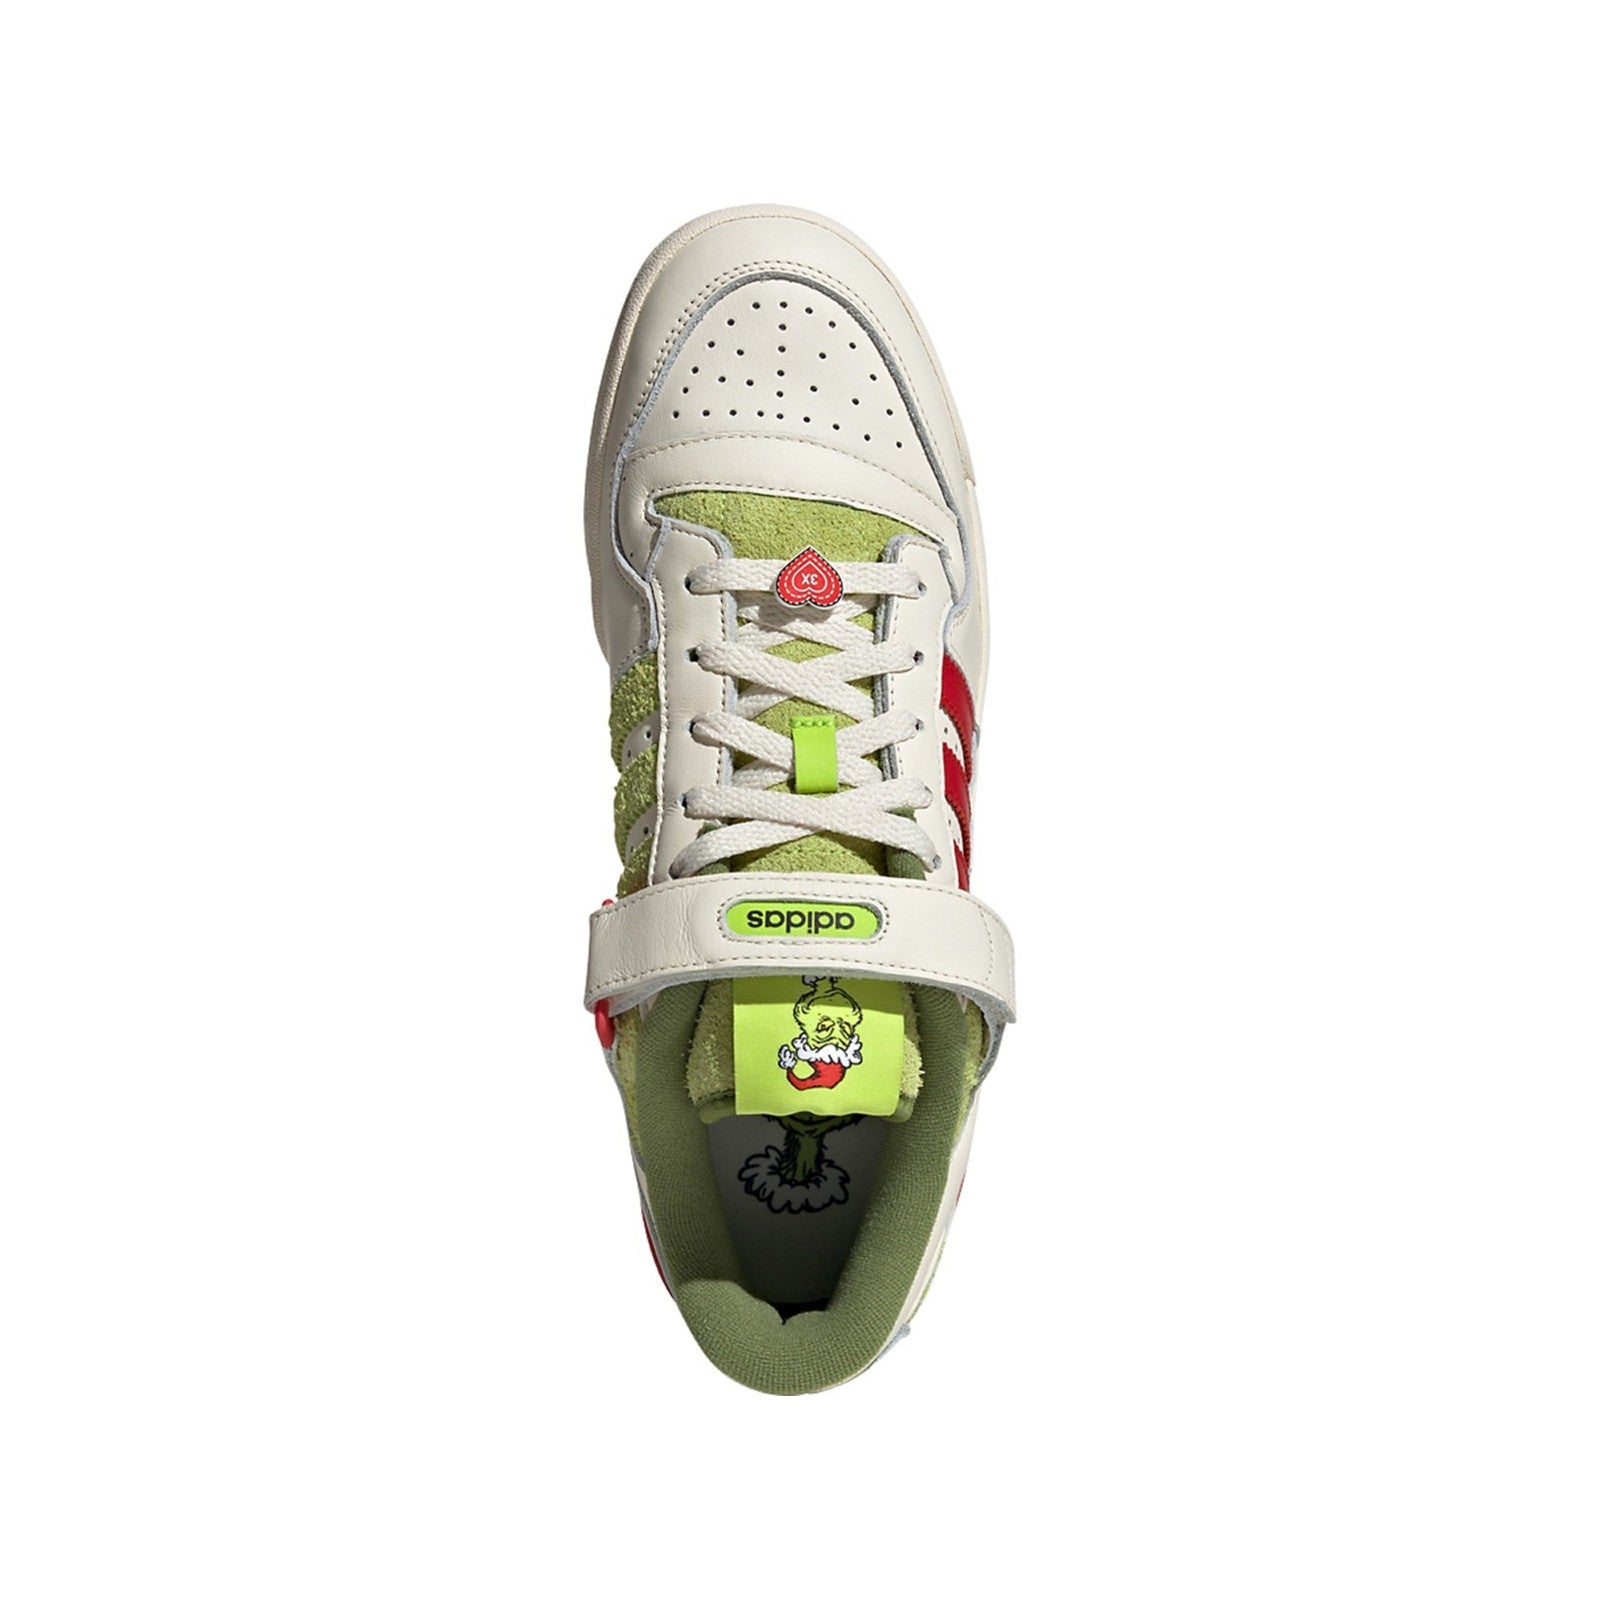 Adidas Originals Forum Low "The Grinch" (CWHITE/COLRED/SSLIME) Men's Shoes ID3512 Men's ID3512